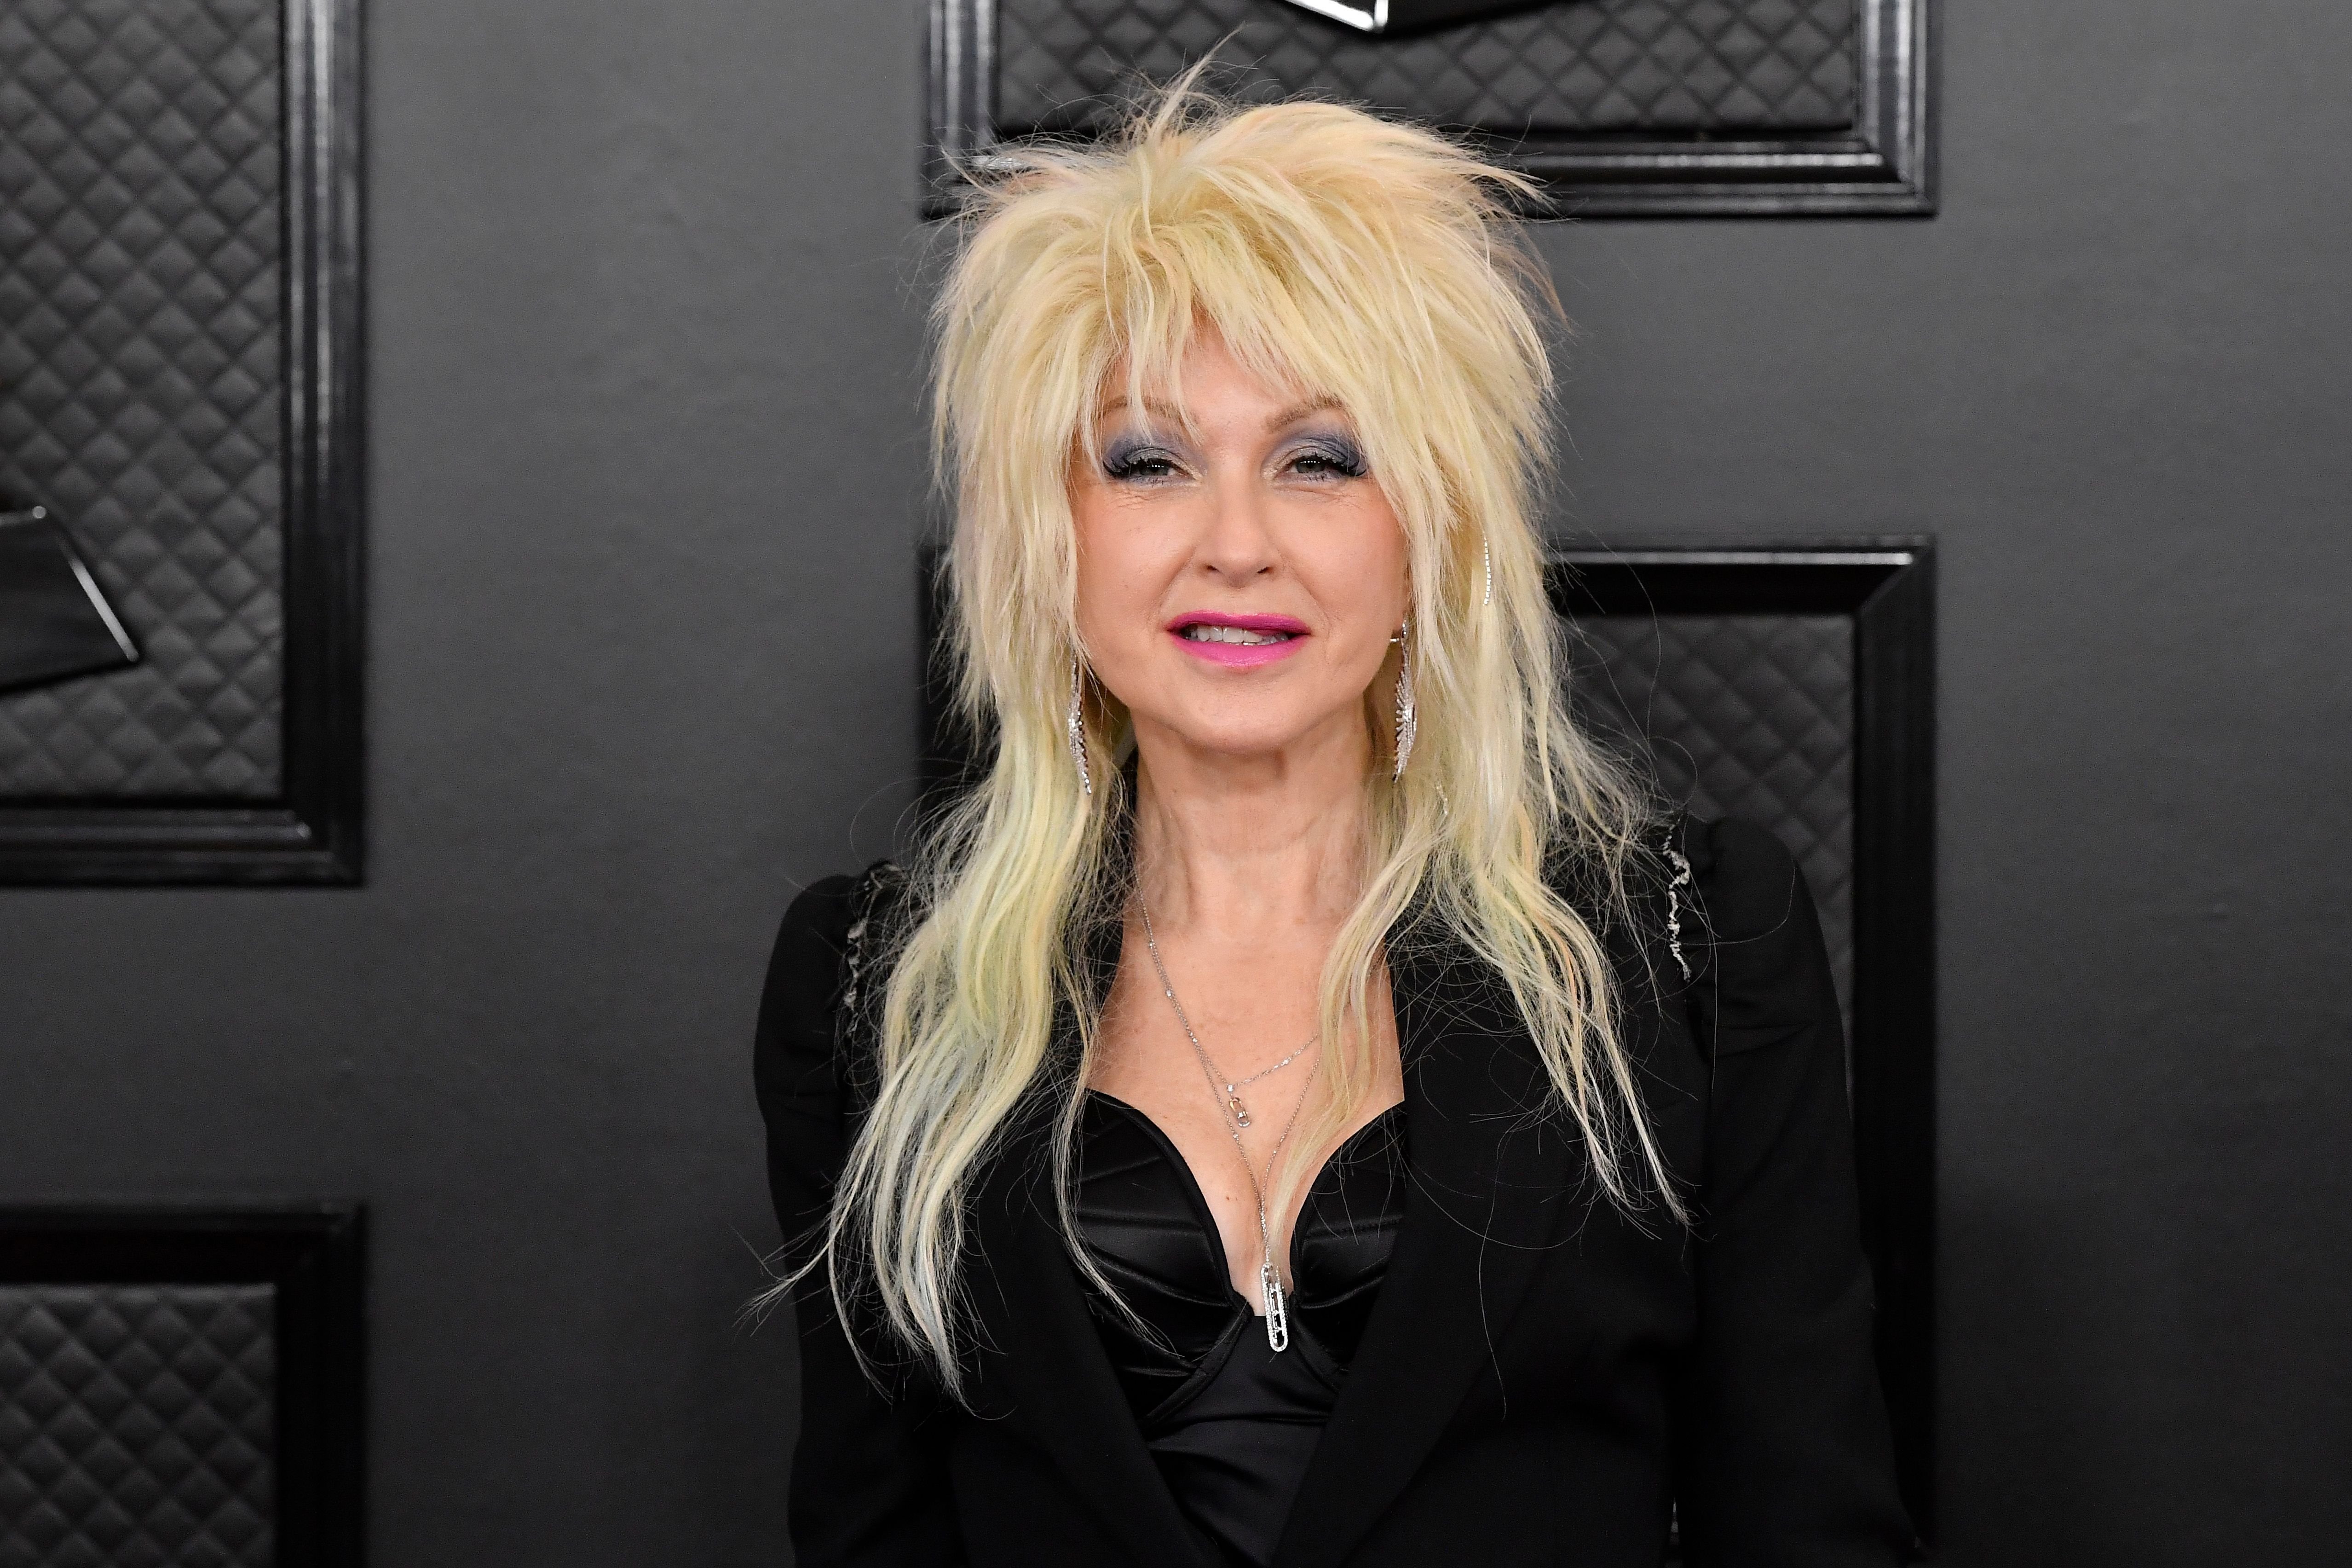 Cyndi Lauper at the 62nd Annual Grammy Awards at StaplesCenter on January 26, 2020, in Los Angeles, California | Photo: Frazer Harrison/Getty Images